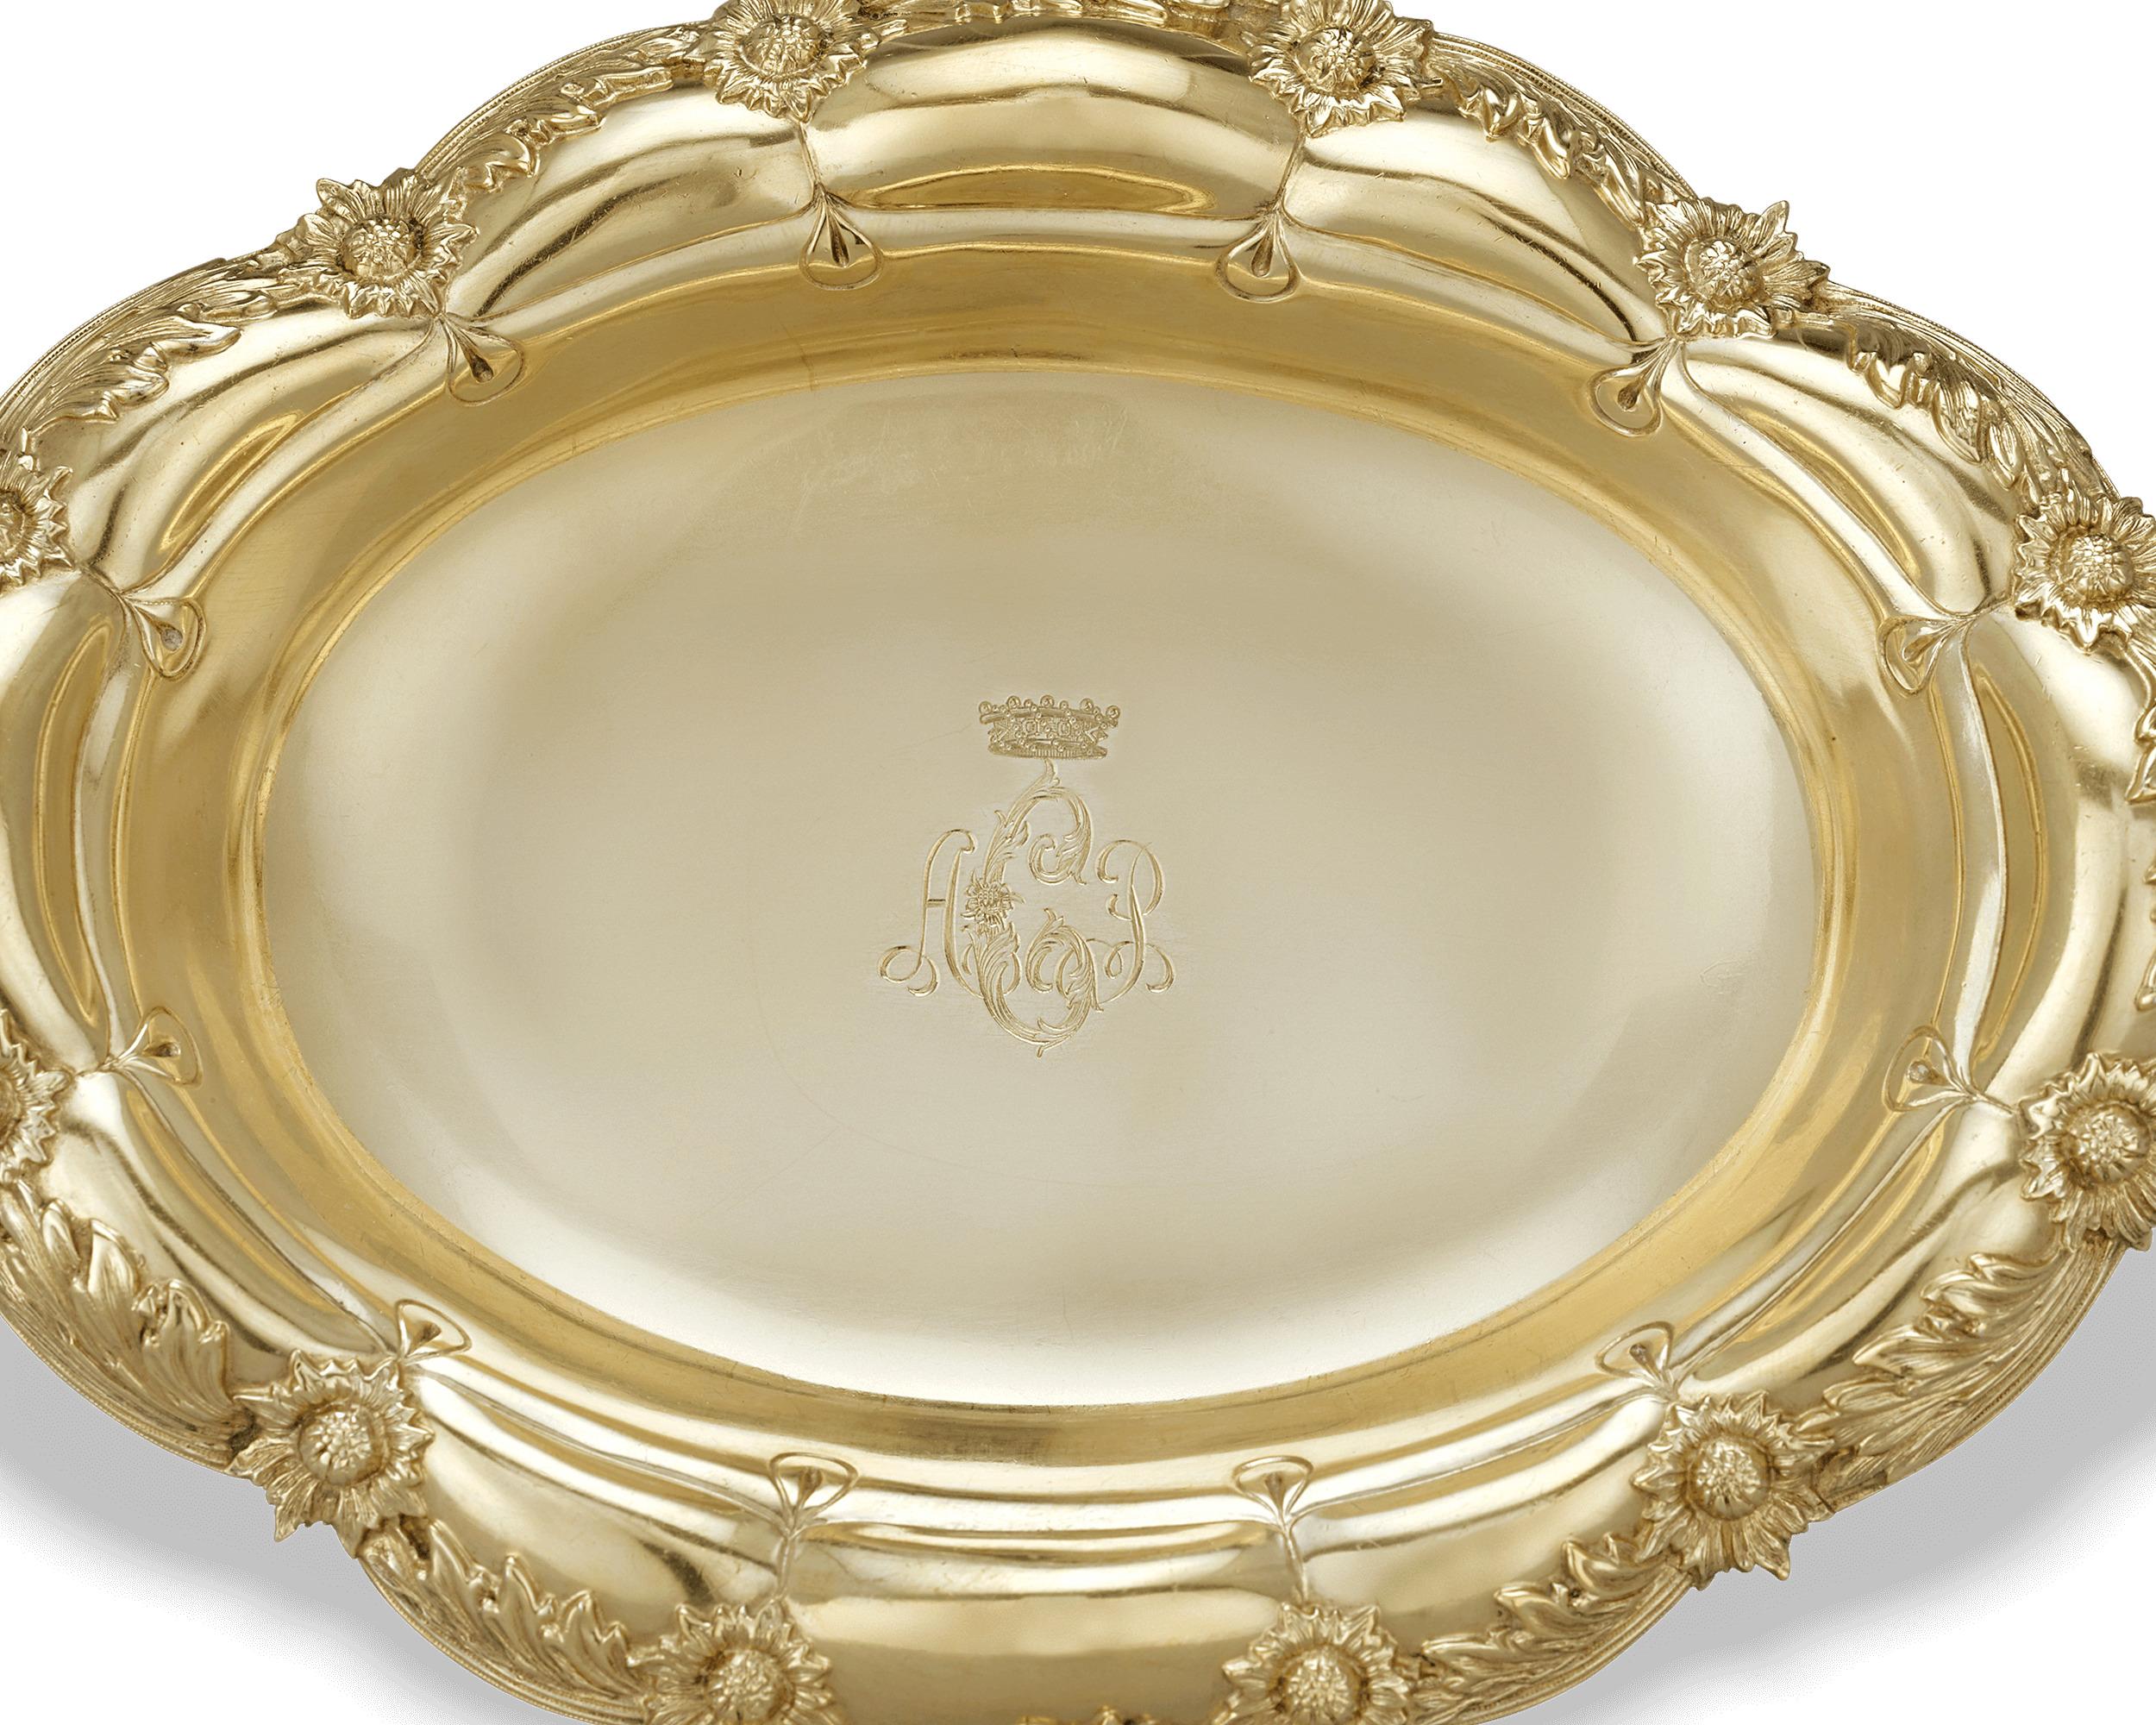 This set of silver-gilt Chrysanthemum oval bowls by Tiffany & Co. would be a grand addition to any fine dining affair. The gilding is quite fitting for this exquisite pattern since the word 